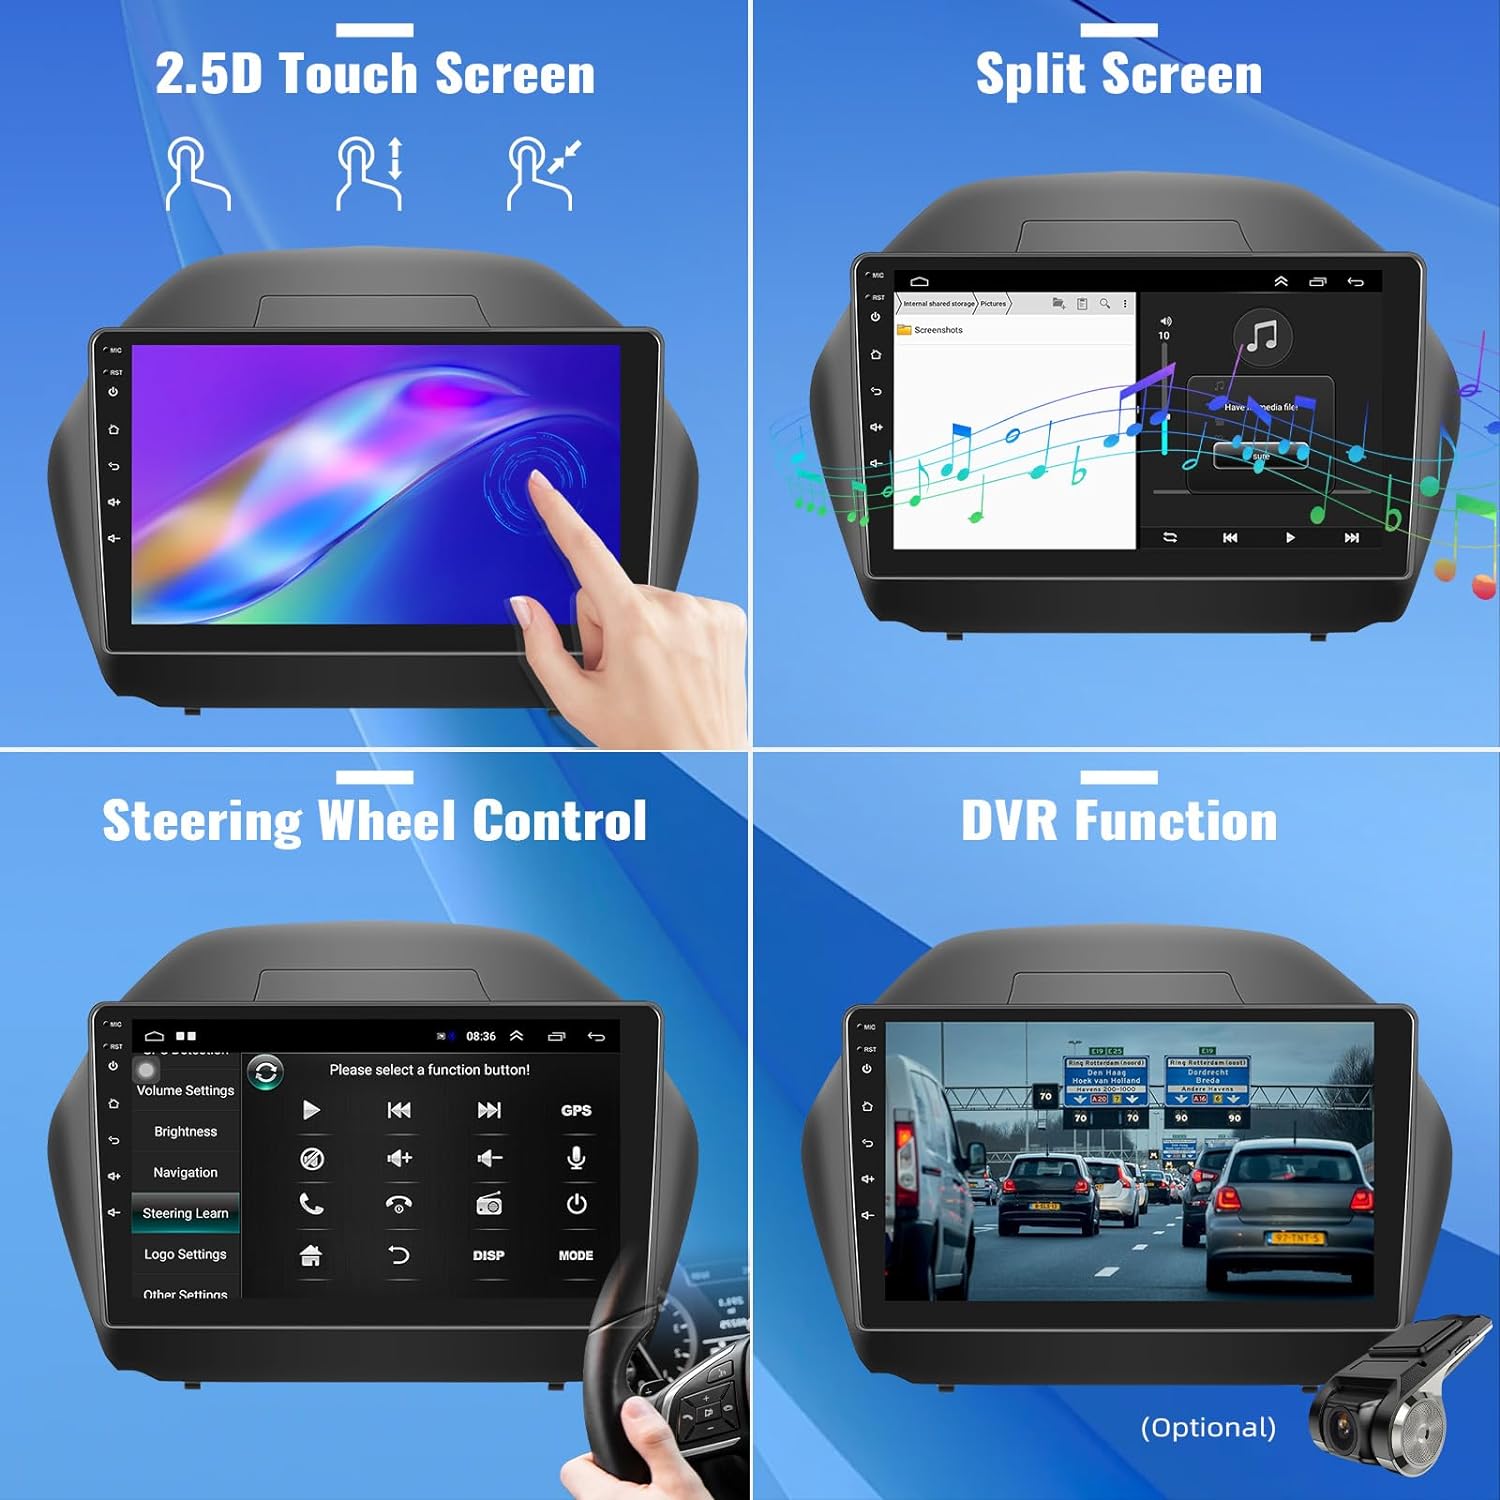 （2G+32G）CAMECHO Android 11 Apple Play Car Stereo for Hyundai IX35 2010-2015 10.1 Inch Touch Screen Double Din Car Stereo with Sat Nav Supports Android Auto/HiFi/WiFi/GPS/DVR/SWC+Reverse Camera